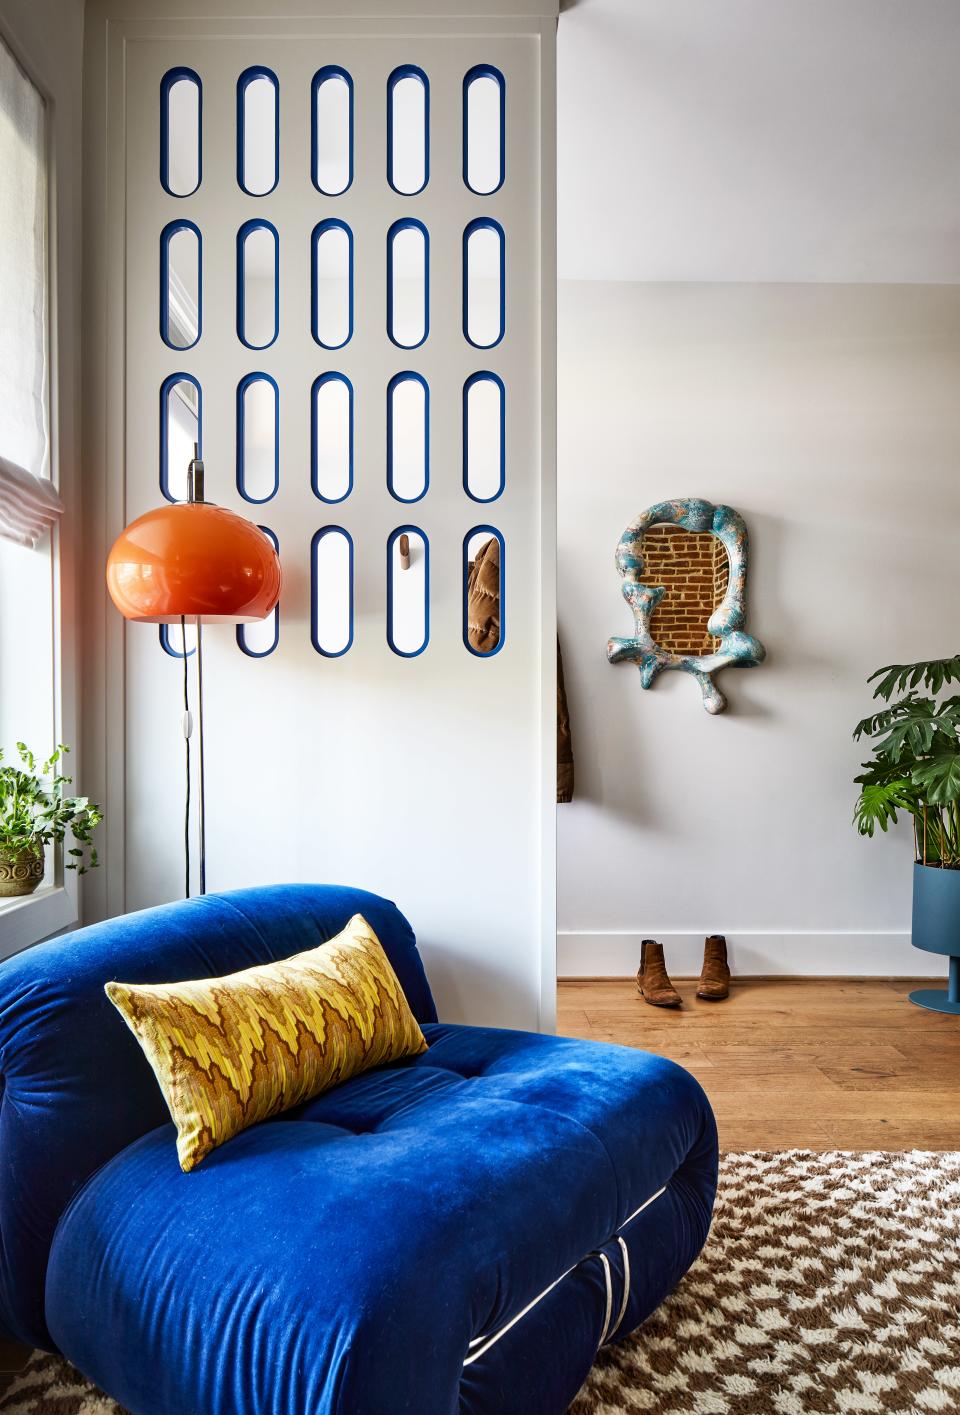 The entryway basks in cool tones, courtesy of a pale blue Iris mirror by Concrete Cat, sourced via Coming Soon, and a cobalt sofa. Zoë counterbalanced the calm with a tangerine lamp from Etsy and a checkered micro rug from June + Blue. Benjamin Moore’s Simply White mutes the walls.